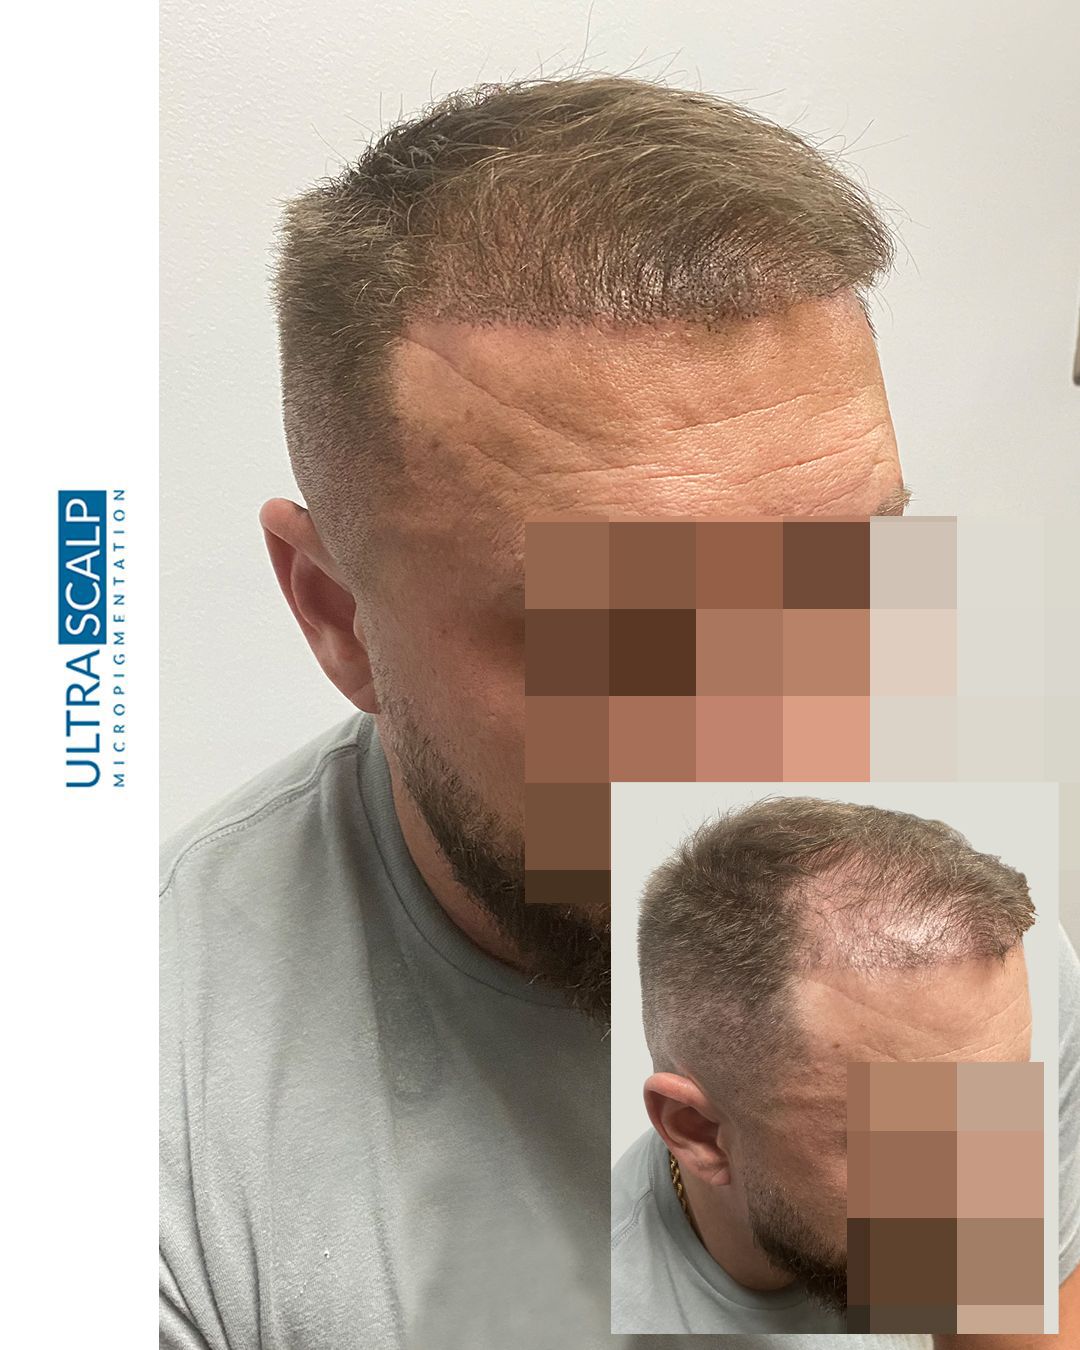 Hair Transplant Scar Cover Up with SMP Tampa